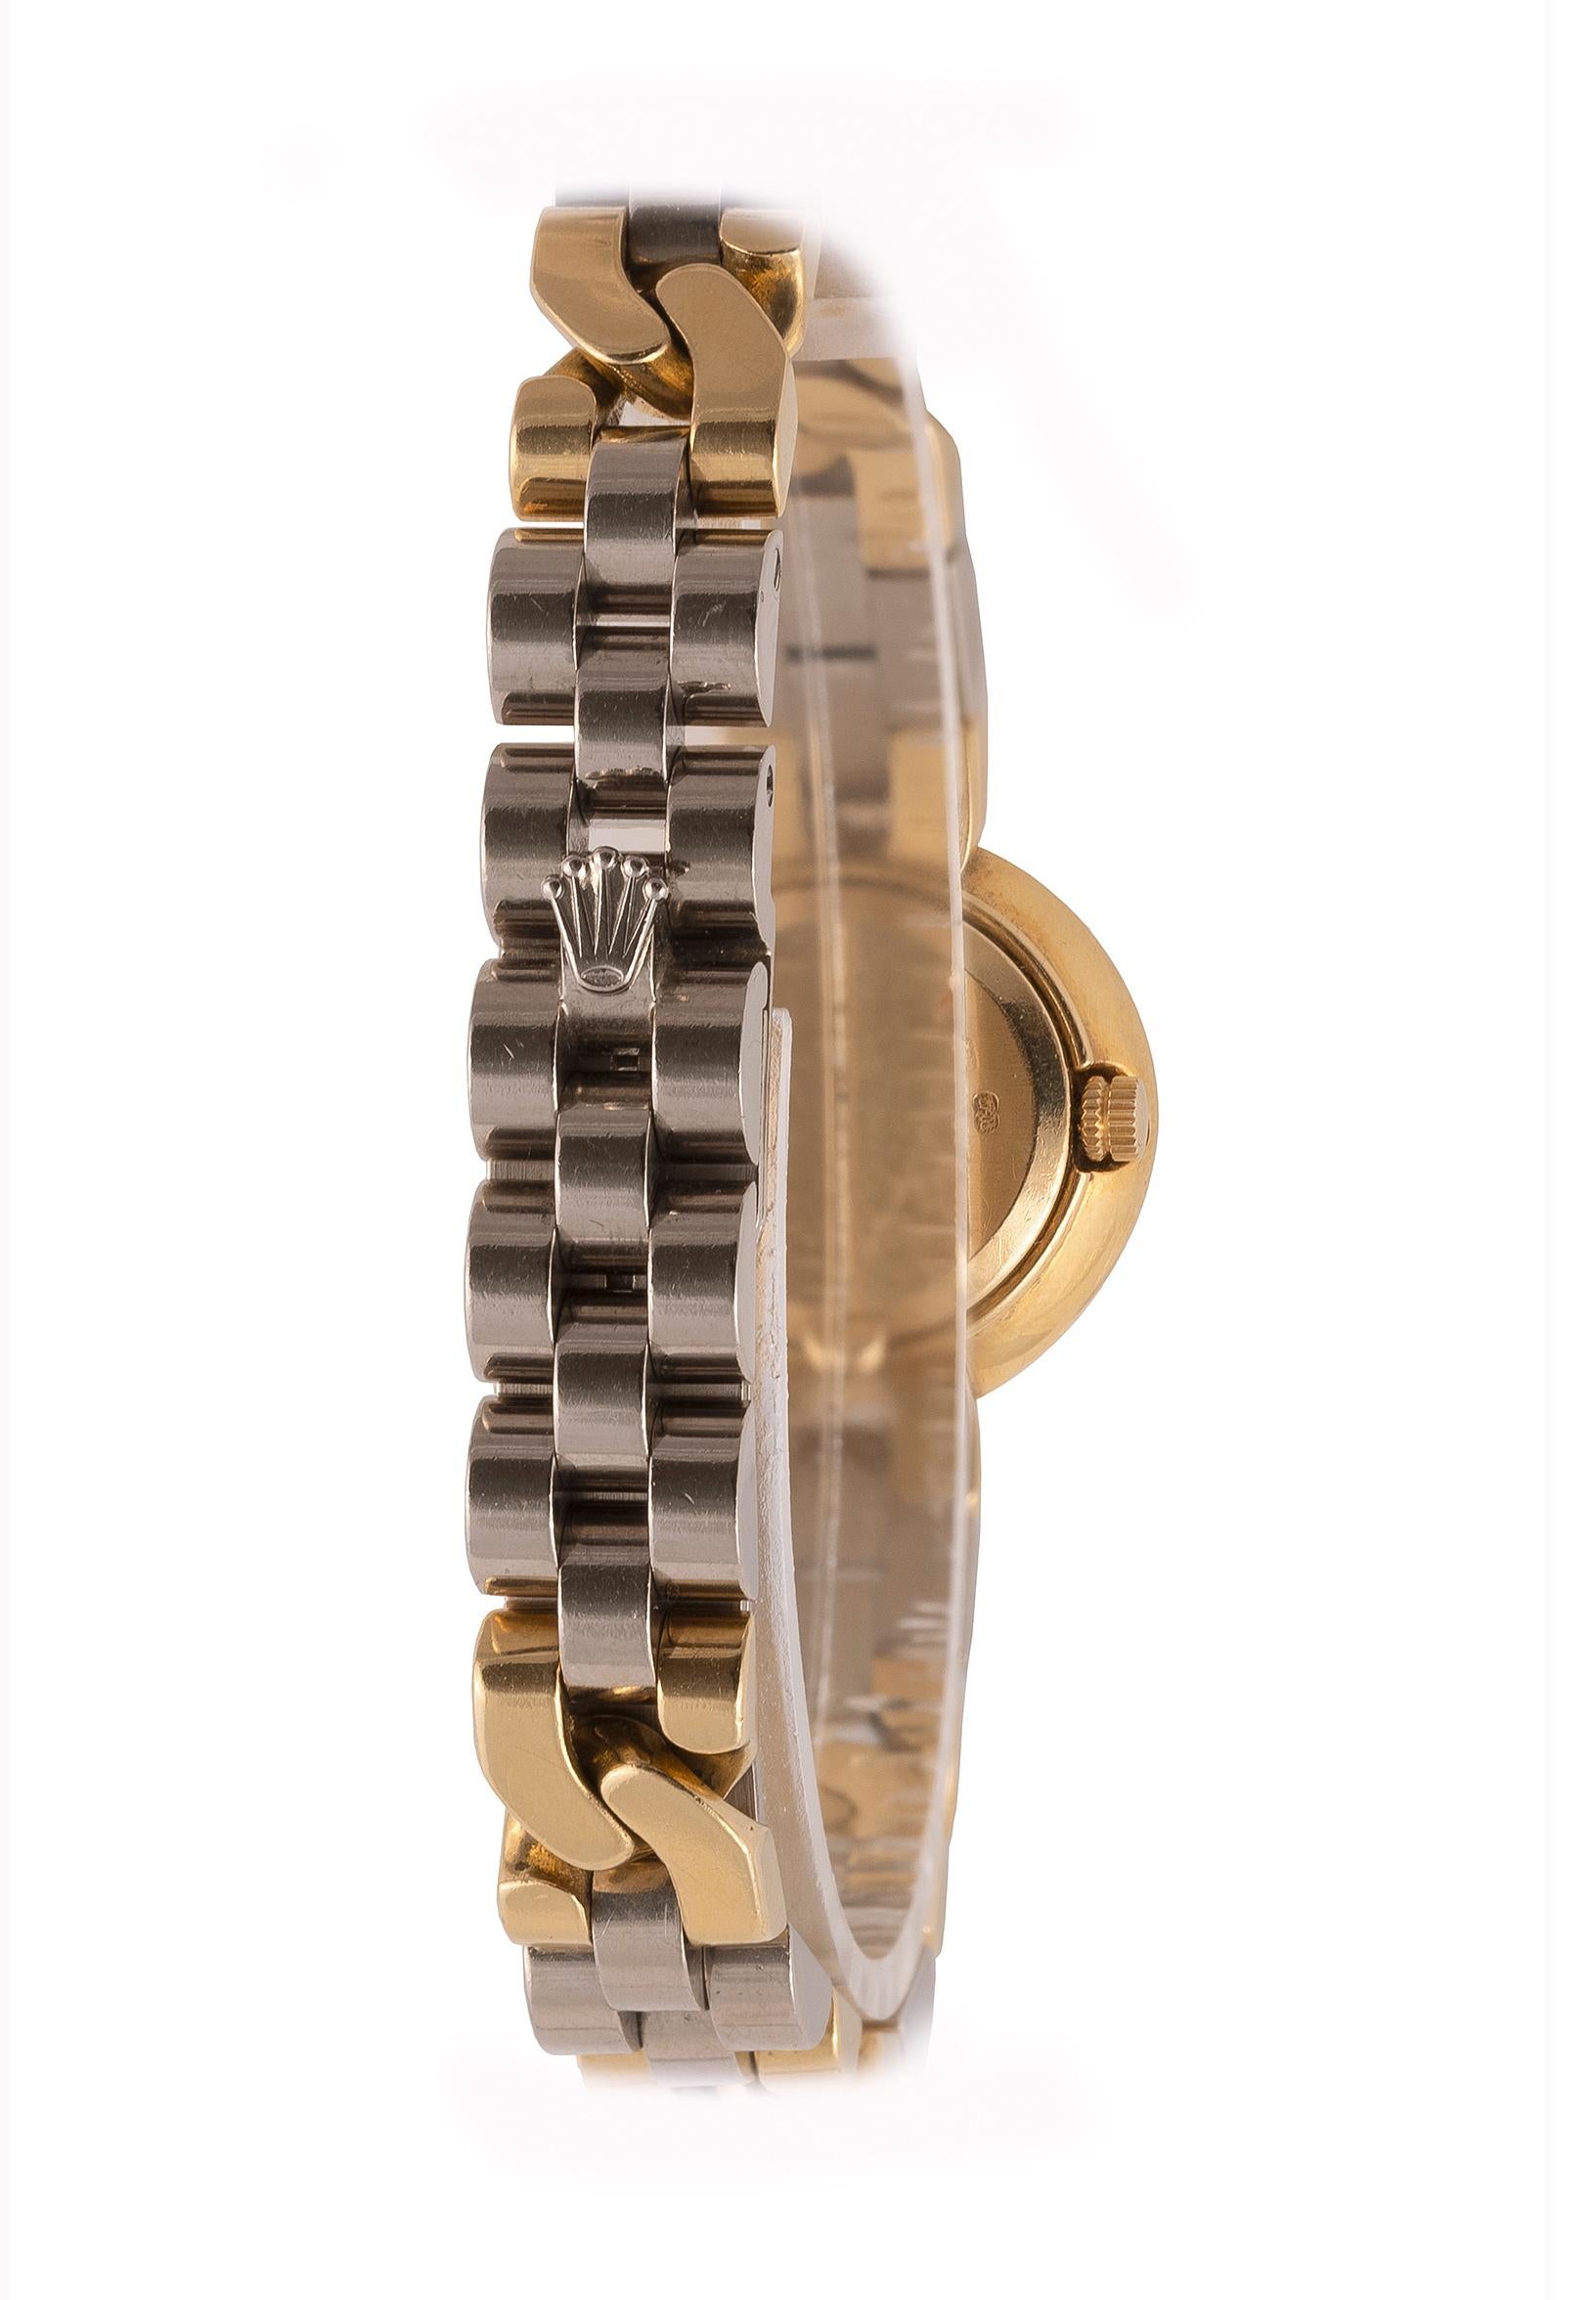 Ladies' wristwatch in 18k gold. Back snap closure. Mirror dial with diamond markers. Quartz movement. Two-tone 18k gold bracelet with double folding clasp. Ref. 2294. No. L346936
Diam. 21.5 mm - Gross weight. 75.2 g